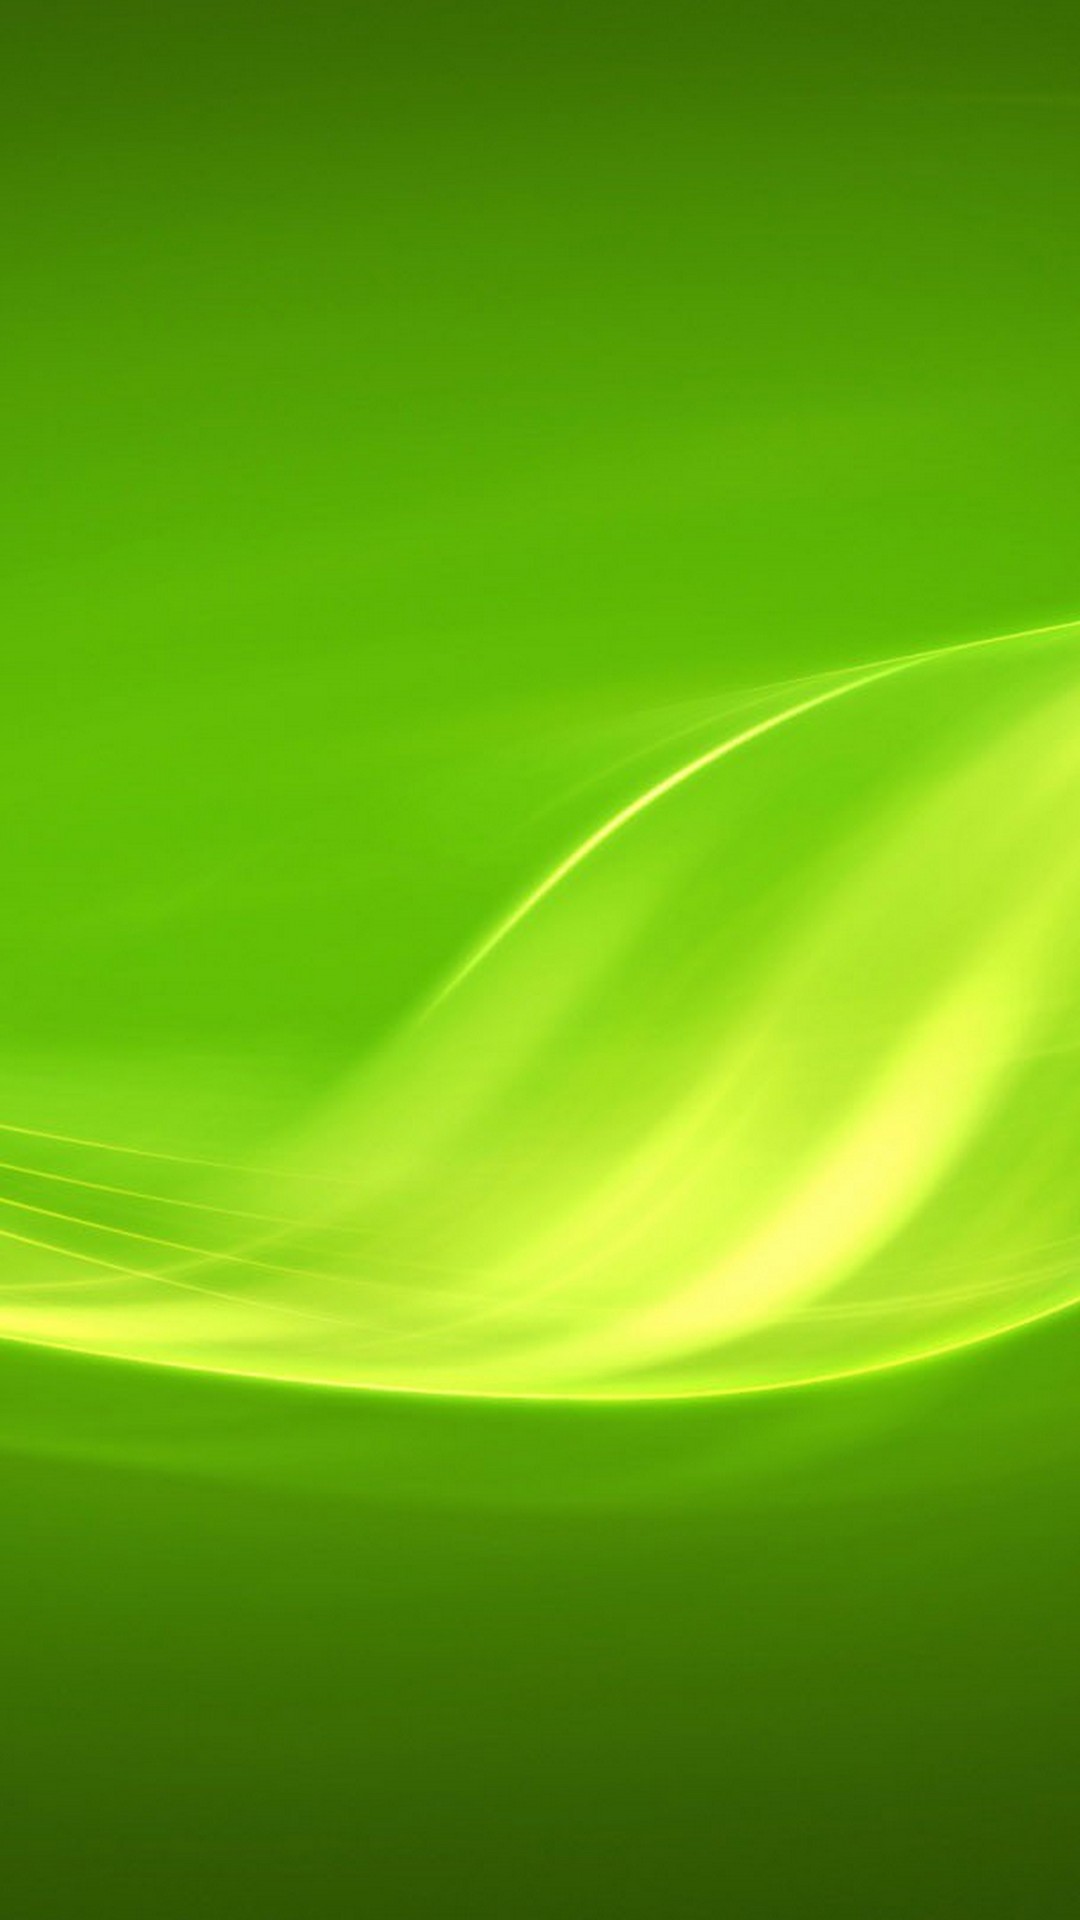 Lime Green HD Wallpapers For Android with image resolution 1080x1920 pixel. You can make this wallpaper for your Android backgrounds, Tablet, Smartphones Screensavers and Mobile Phone Lock Screen